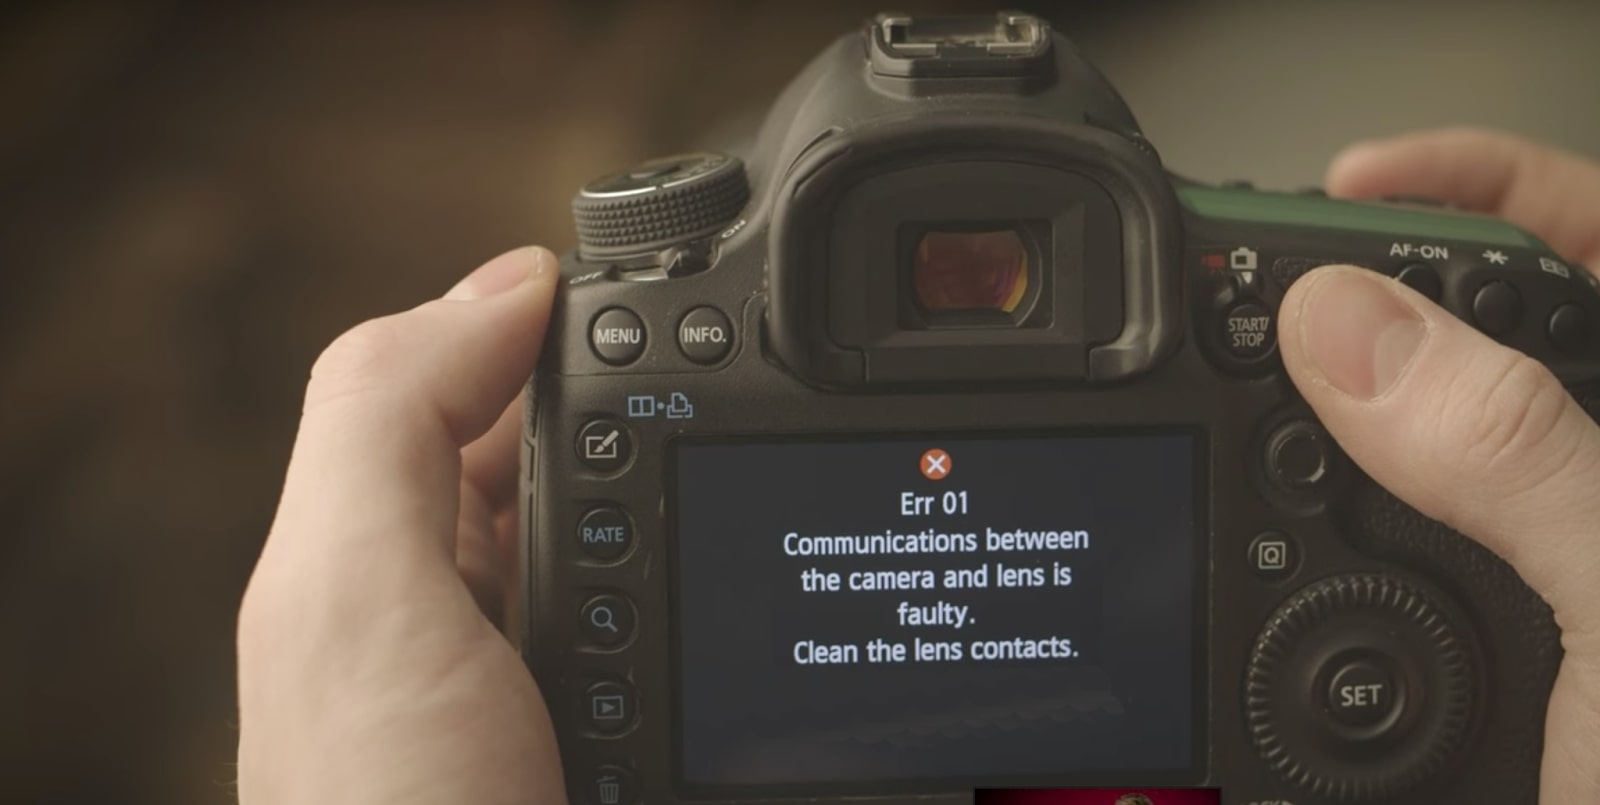 How To Deal With Nikon Coolpix Lens Error Problems